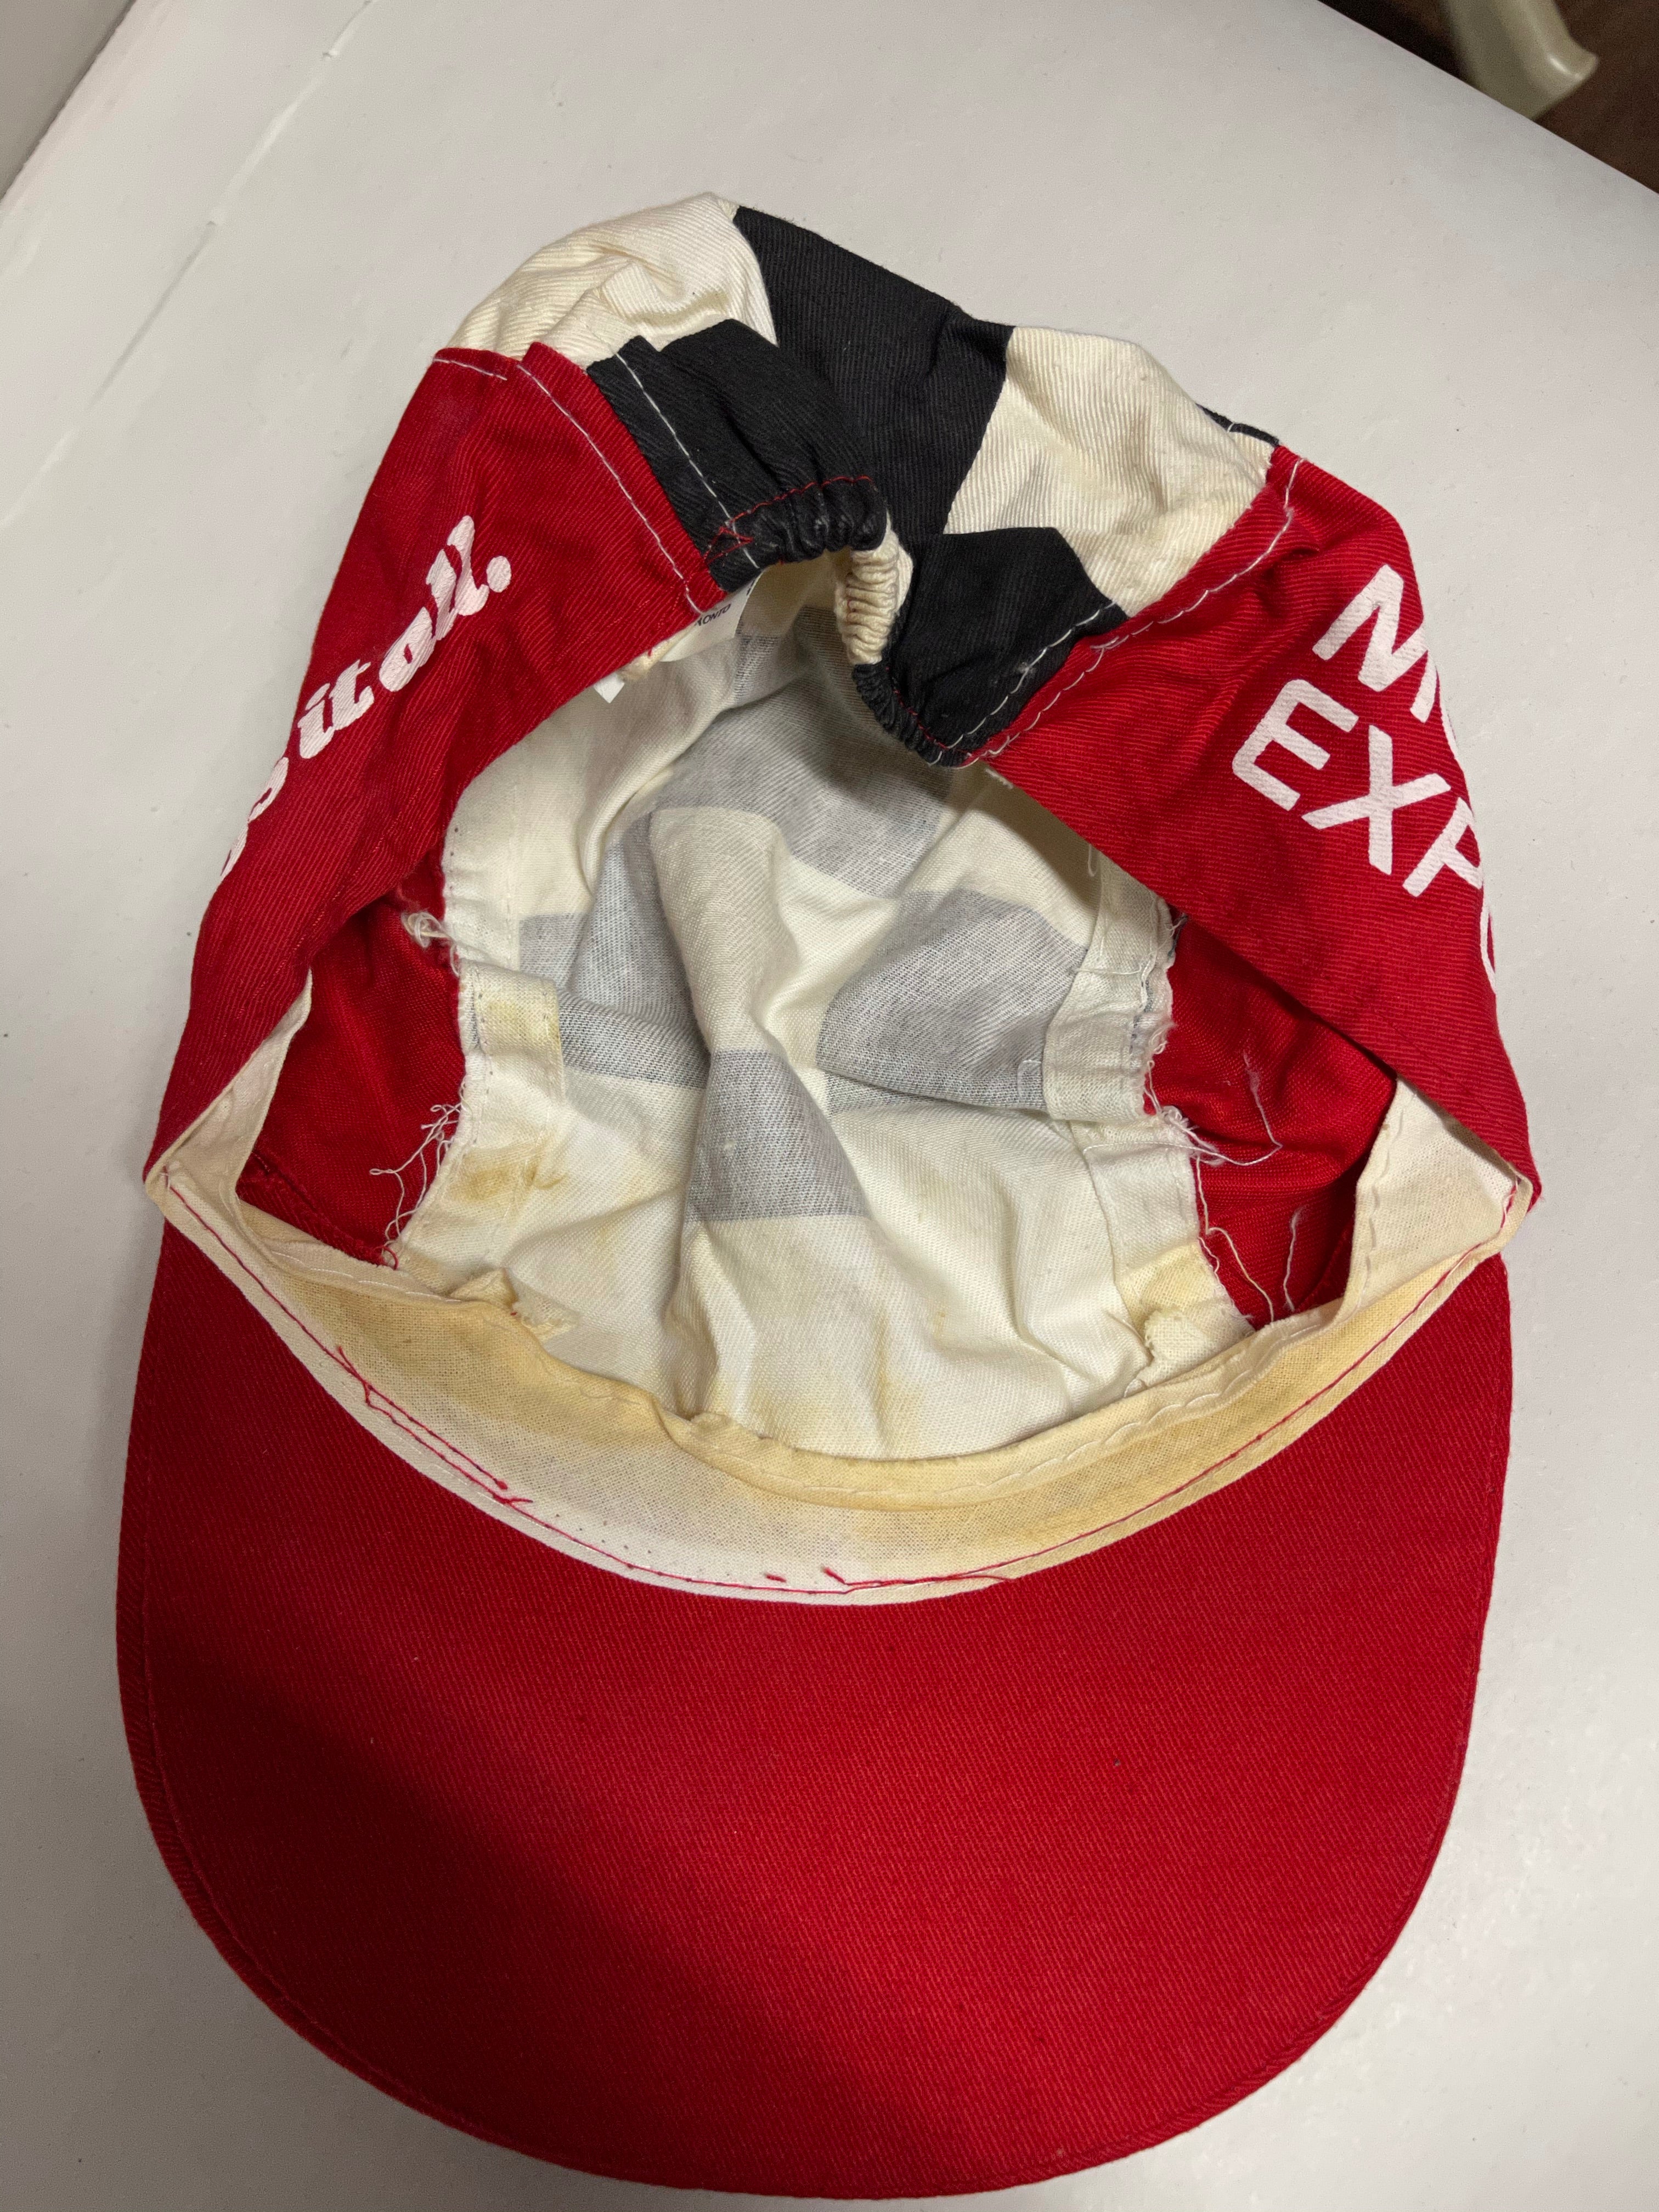 Molson Indy Racing rare vintage 5th anniversary stretch hat 1991